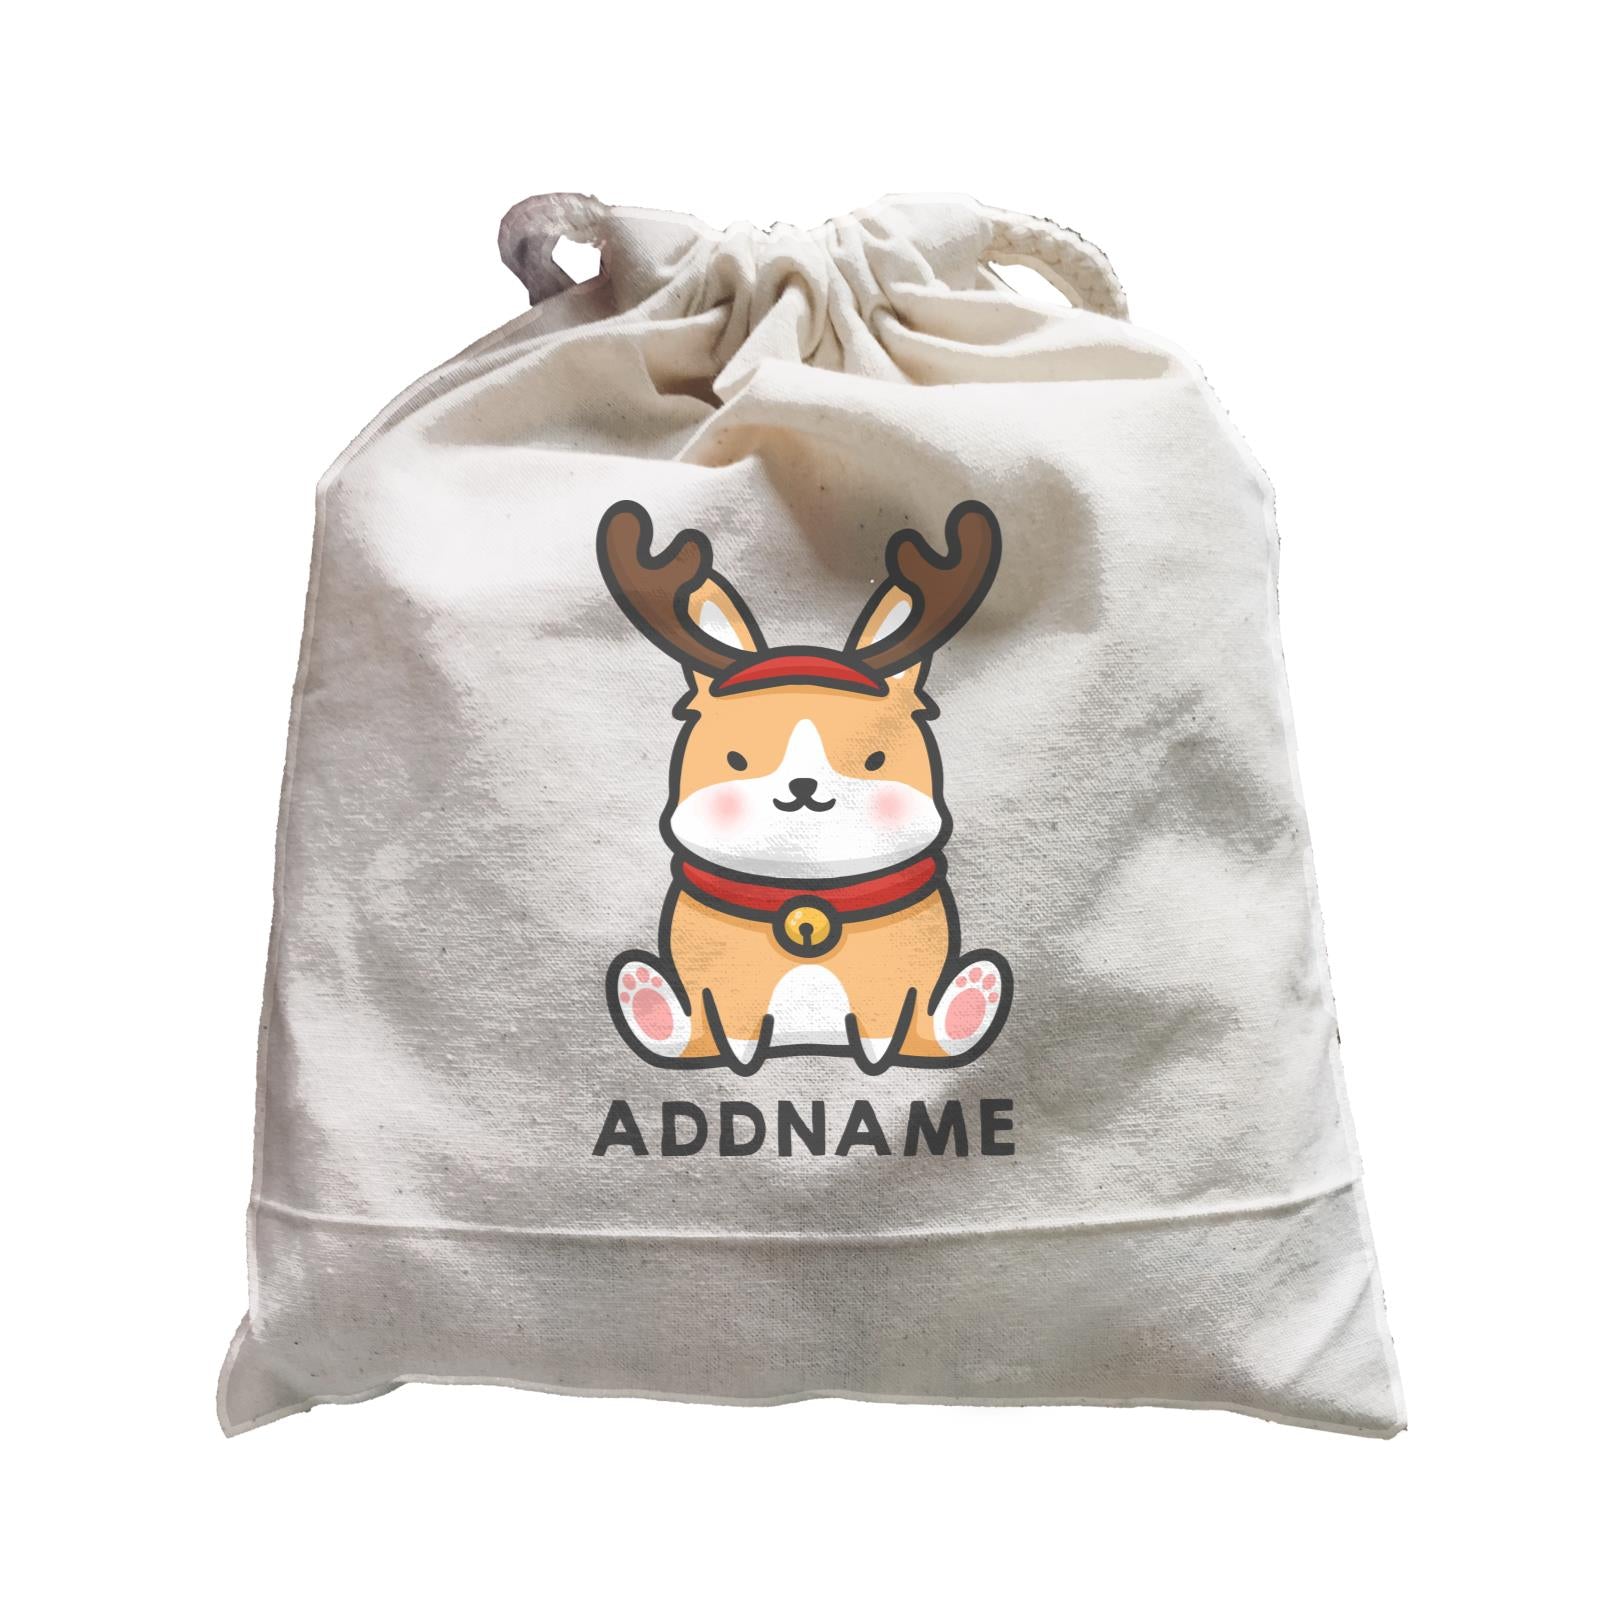 Xmas Cute Dog With Reindeer Antlers Addname Accessories Satchel